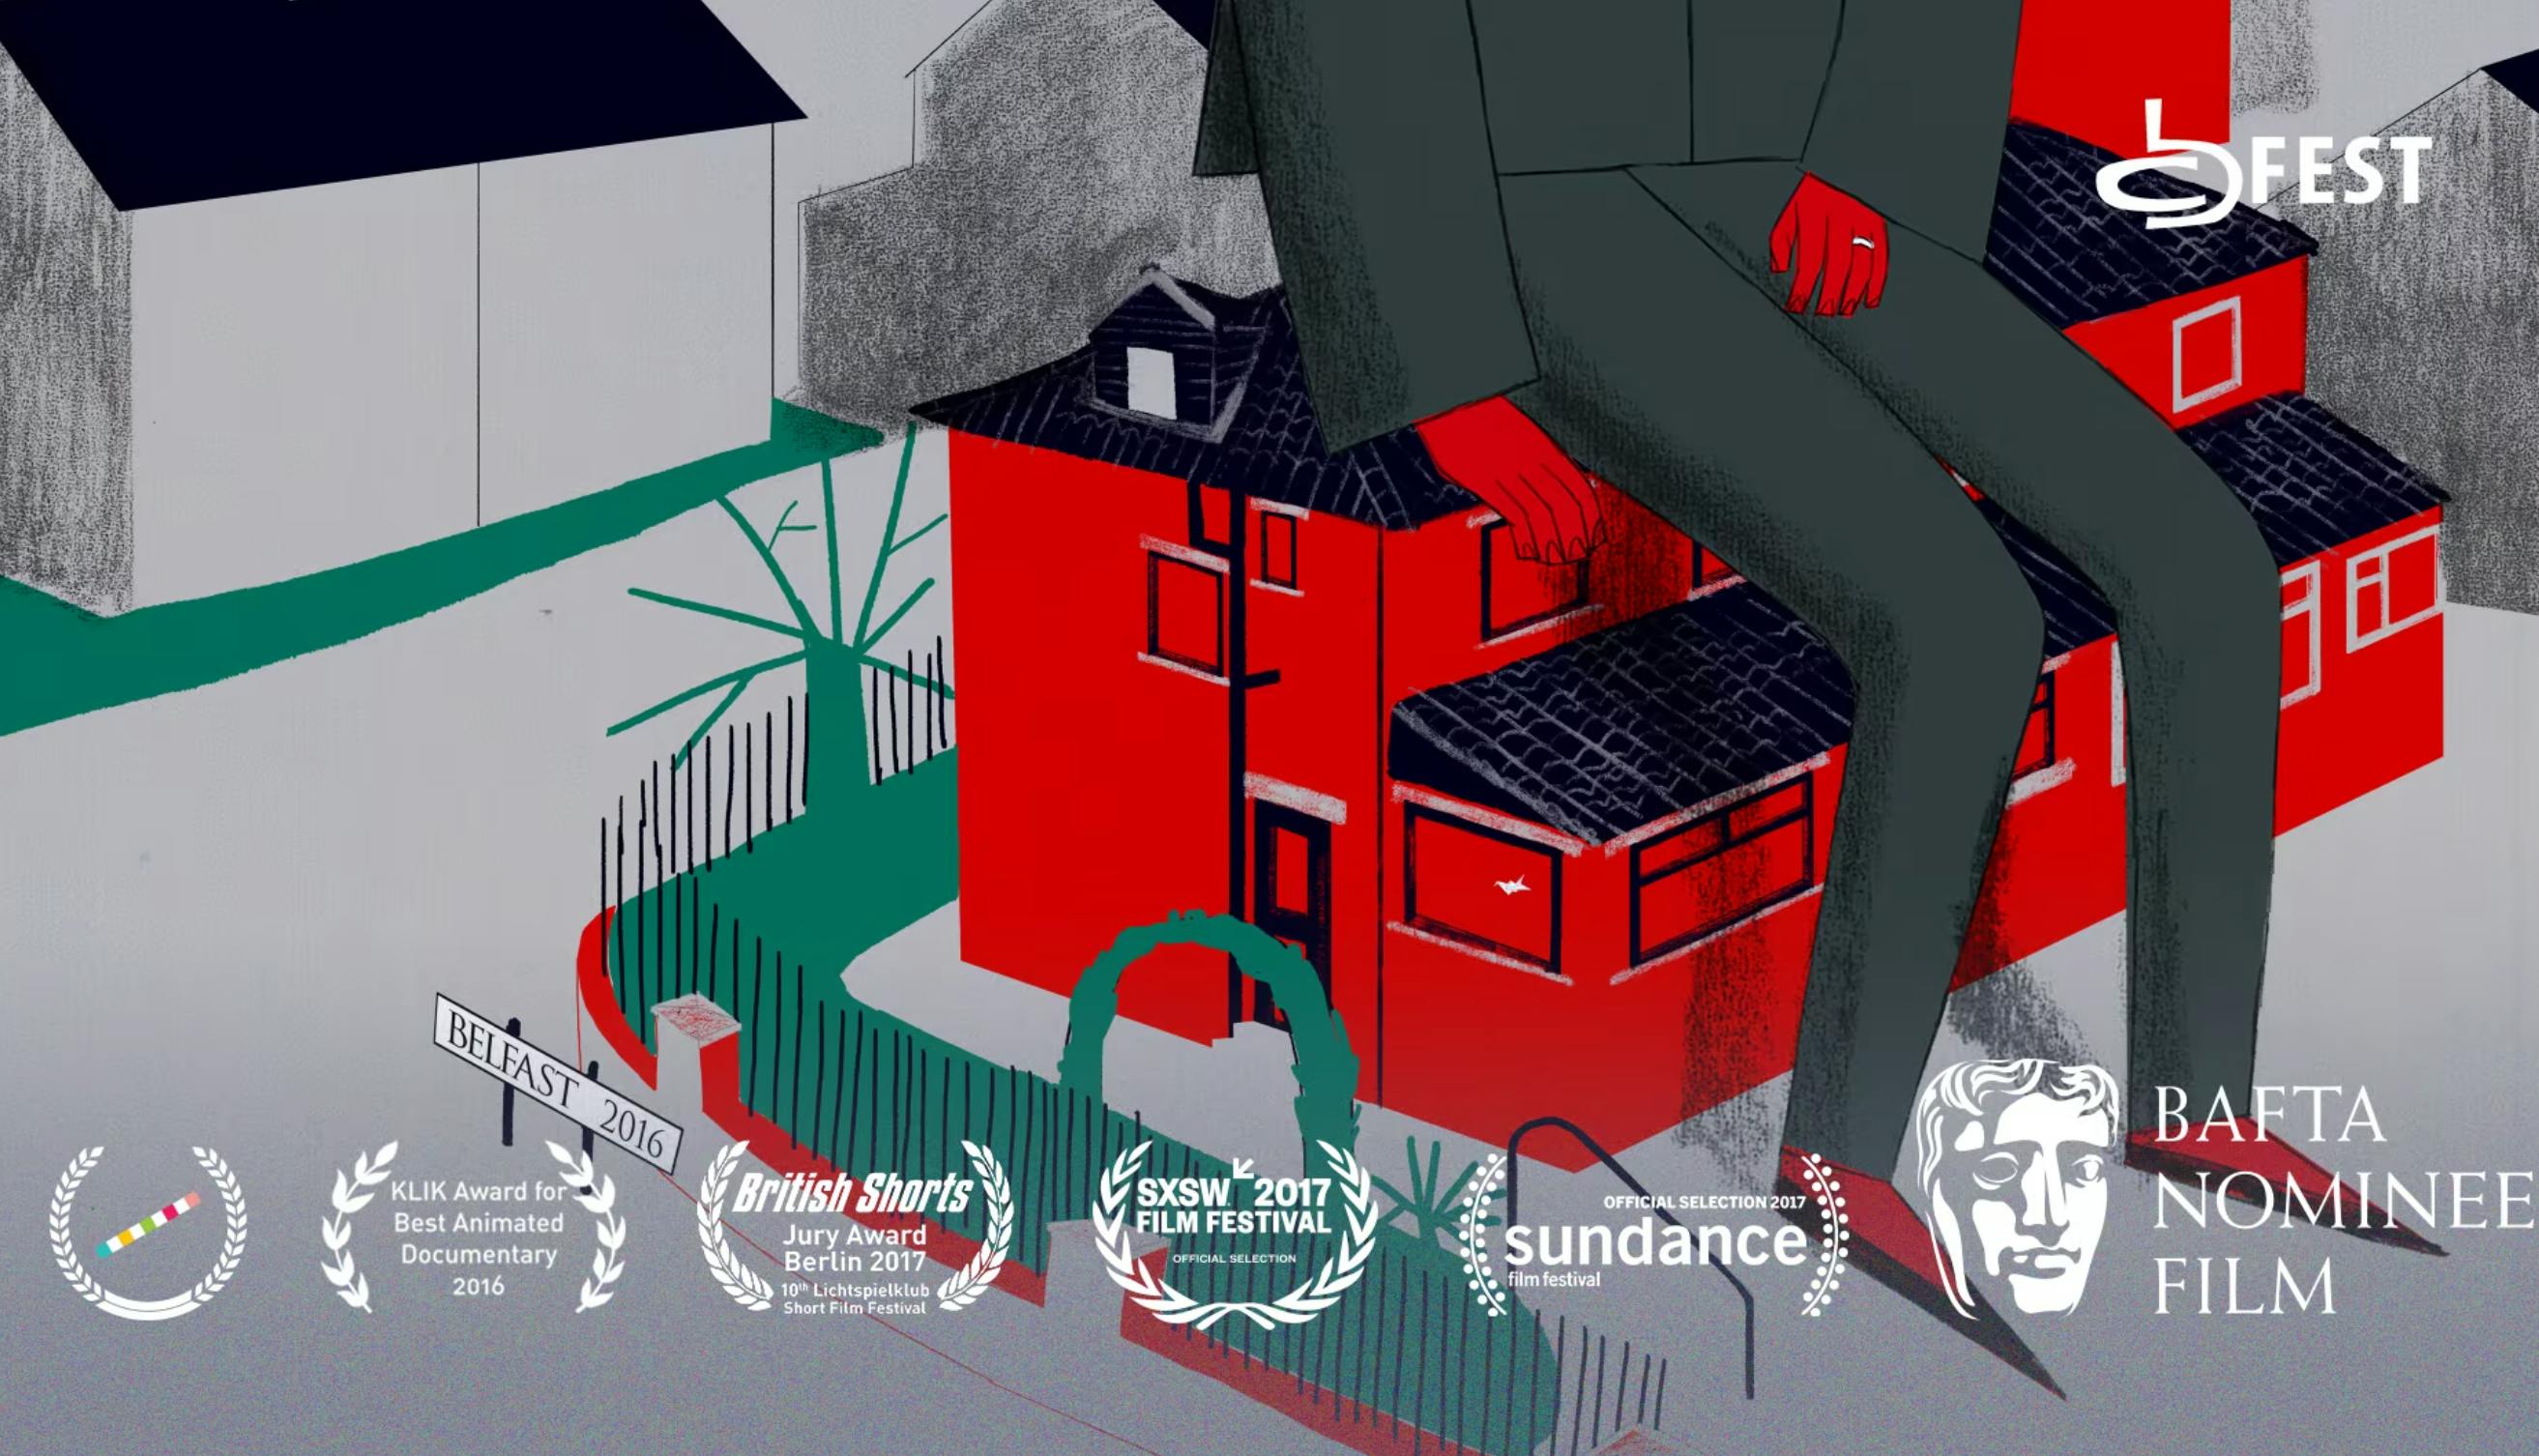 image from Jennifer Zheng's Tough (2016). Image of a house on a street in flat colours of green, grey, black and red. A figure wearing a wedding ring is large enough to sit on the house, but the image cuts off at their chest so there's no view of their face